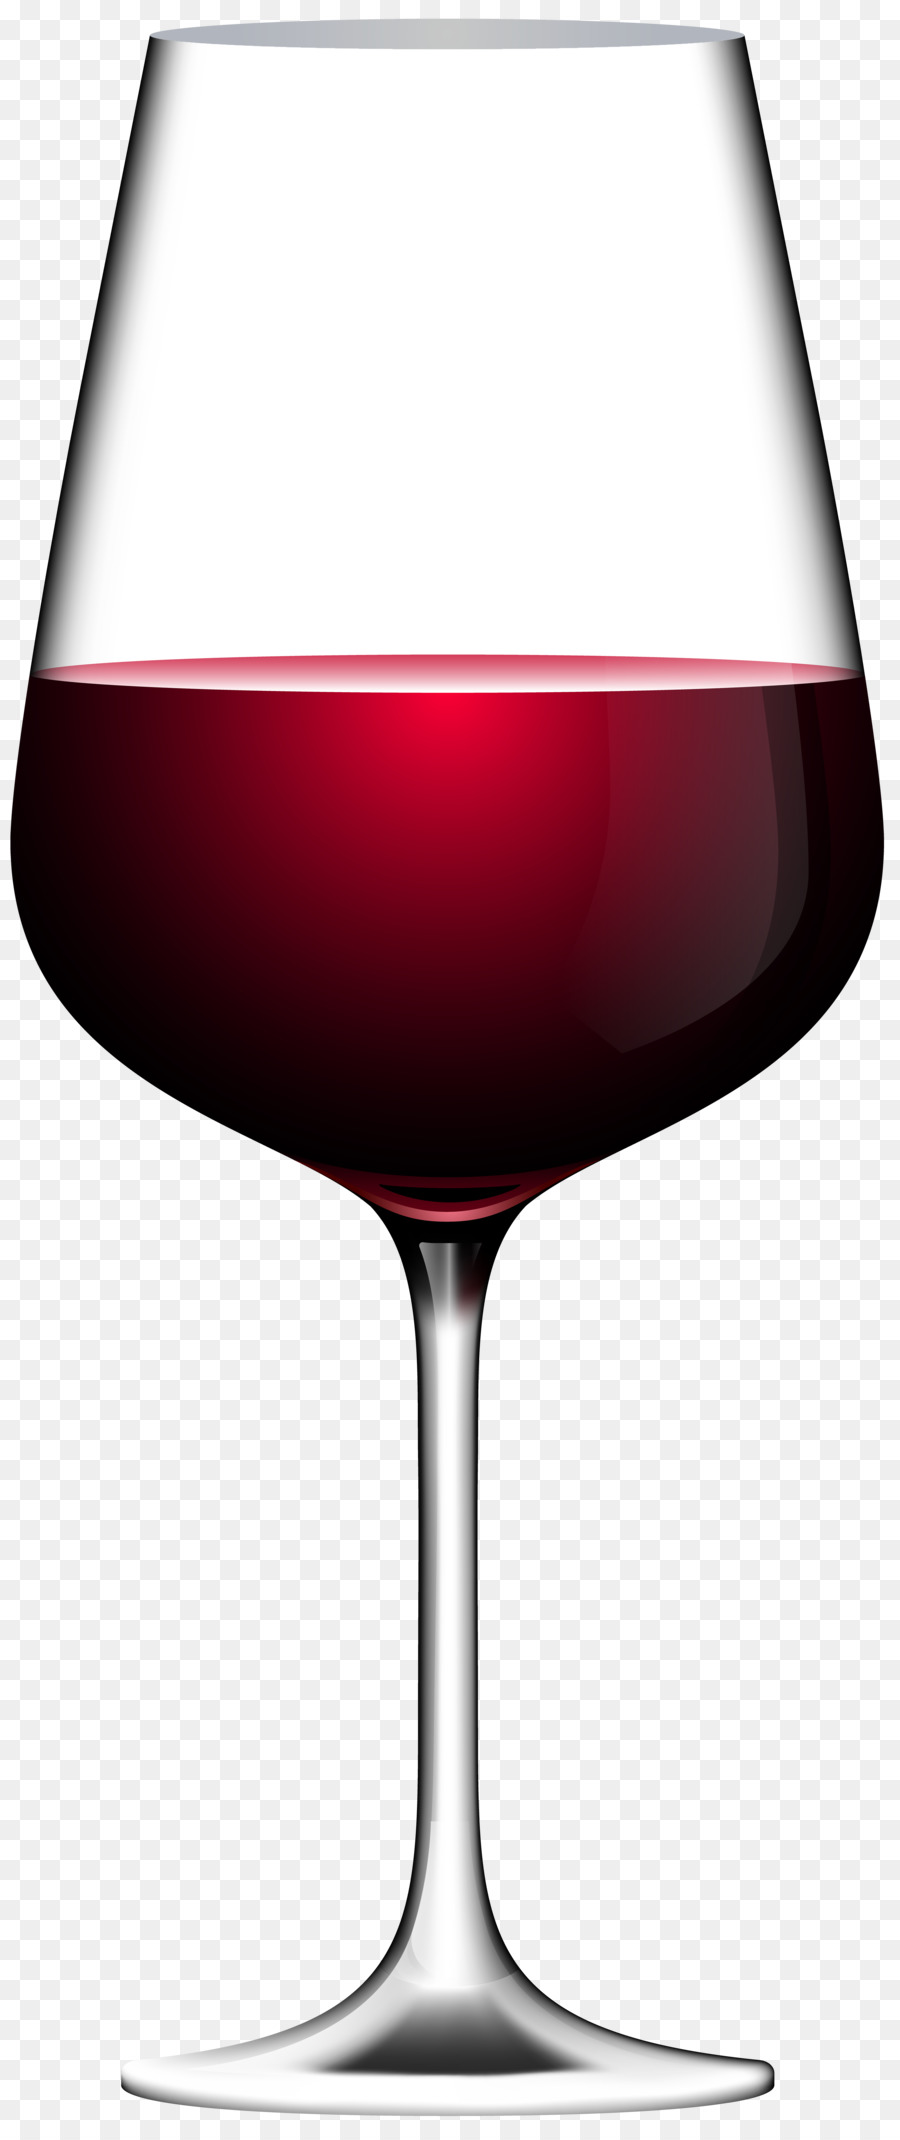 Red Wine White wine Orlando Wines Wine glass - Transparent Wine Cliparts png download - 3384*8000 - Free Transparent Red Wine png Download.